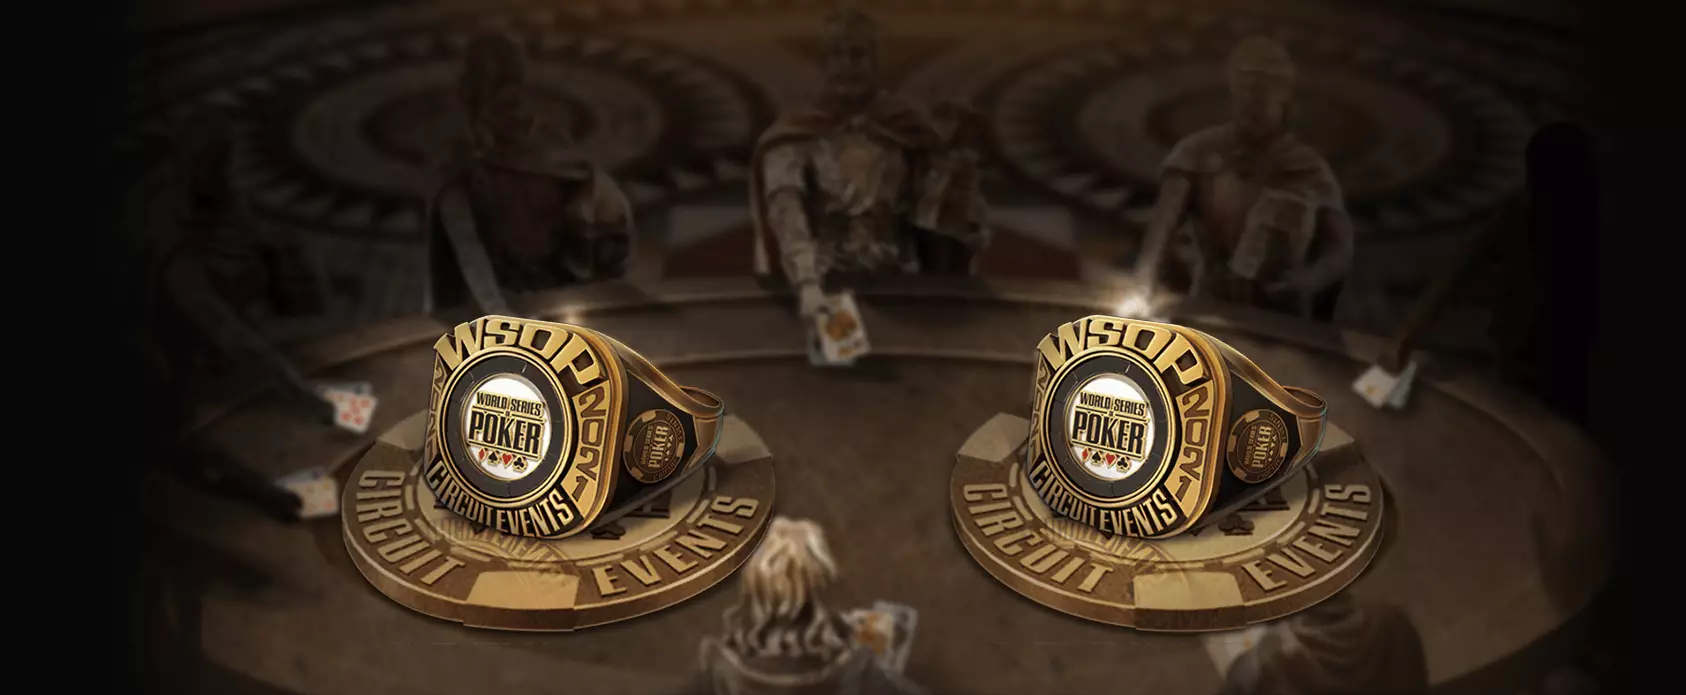 18 WSOP Circuit Rings To Be Won Over The Series